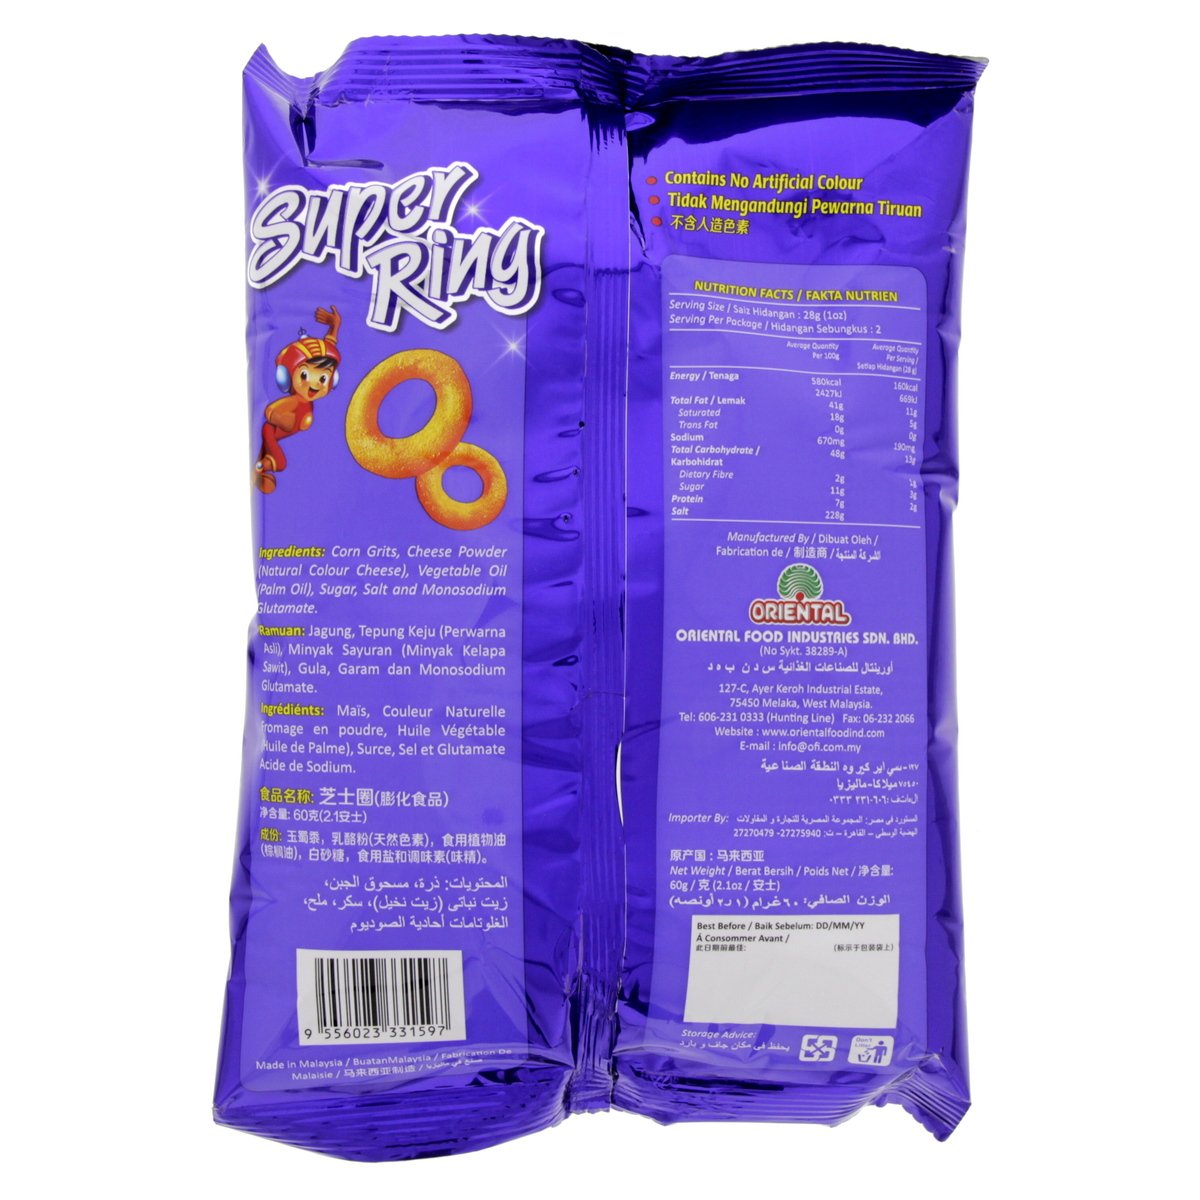 Super Ring Cheese Flavoured Snacks 60g